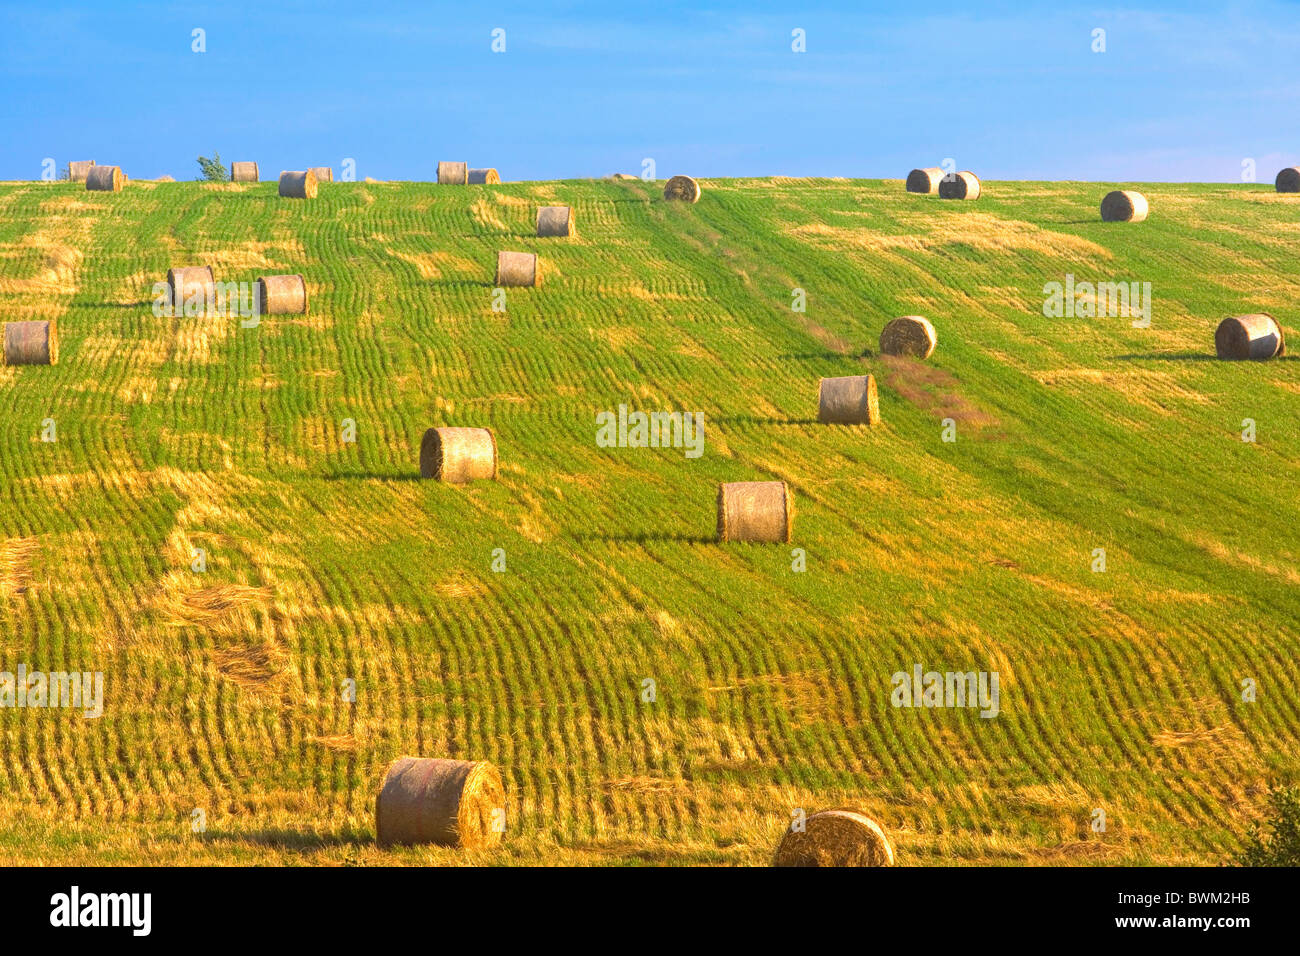 Bales Hay agriculture field fields harvest harvesting Stock Photo